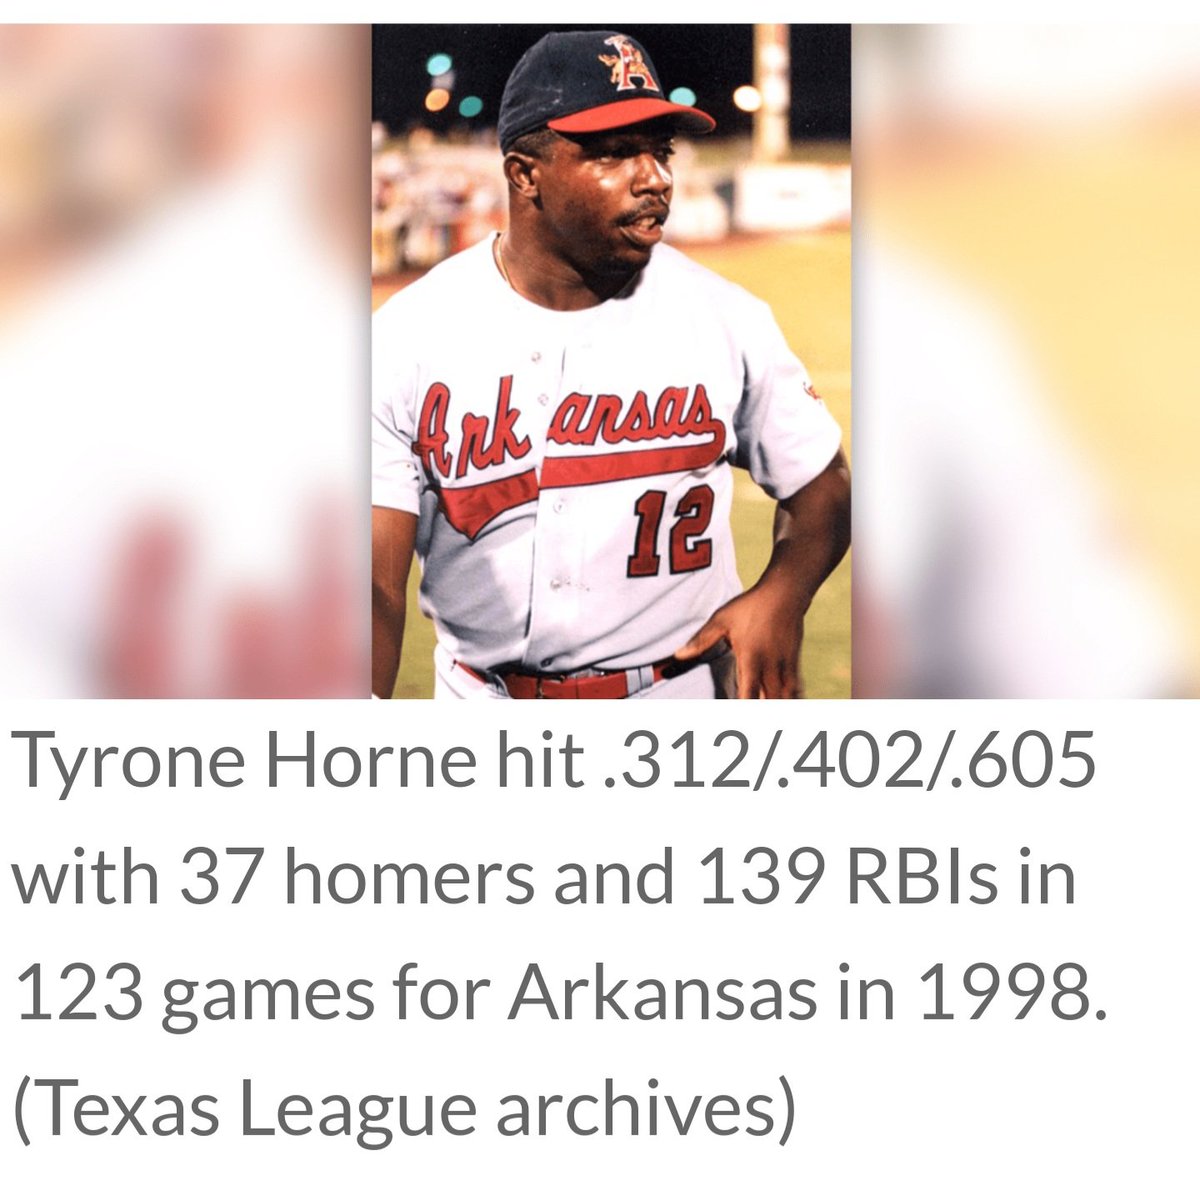 Here's a baseball record, never done before..

On July 27, 1998, playing for the Arkansas Travelers of the Double-A Texas League, (Roger) Tyrone Horne hit four home runs in a 13-4 victory at San Antonio.  Horne's 'home run cycle' has yet to be replicated.

https://t.co/rfvGVIabvH https://t.co/GCYwwYdAVD